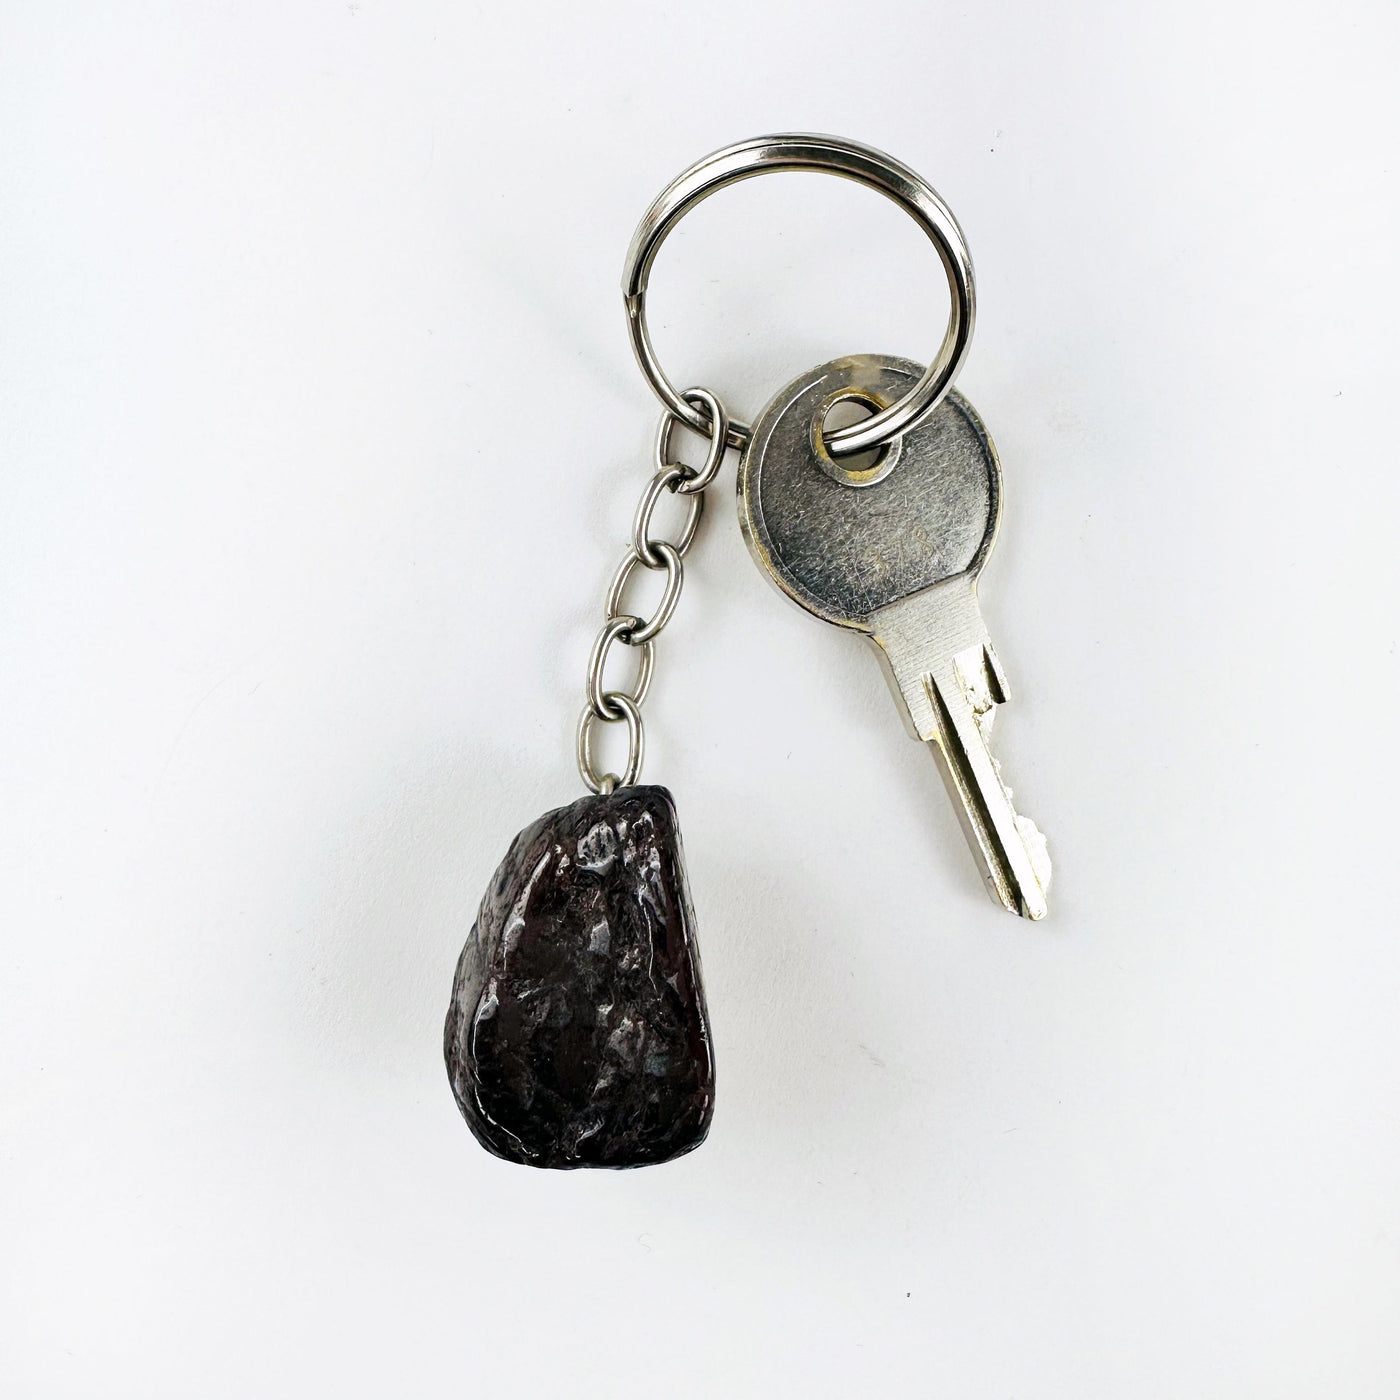 Tumbled Garnet Keychain with a key on the ring